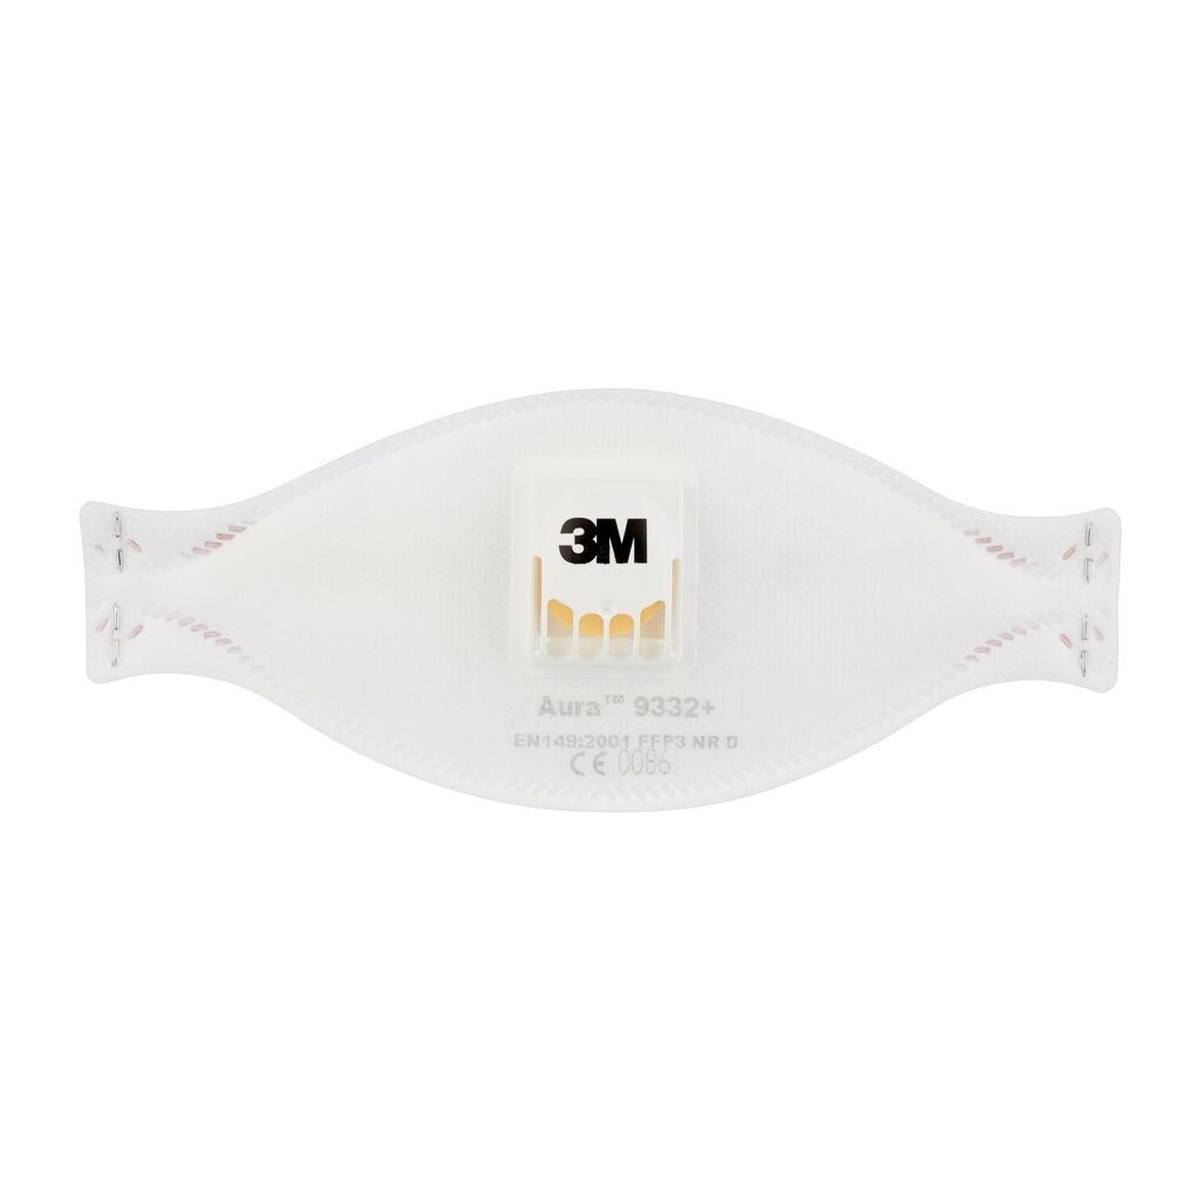 3M 9332+SV Aura Respirator FFP3 with cool-flow exhalation valve, up to 30 times the limit value (hygienically individually packaged), small pack